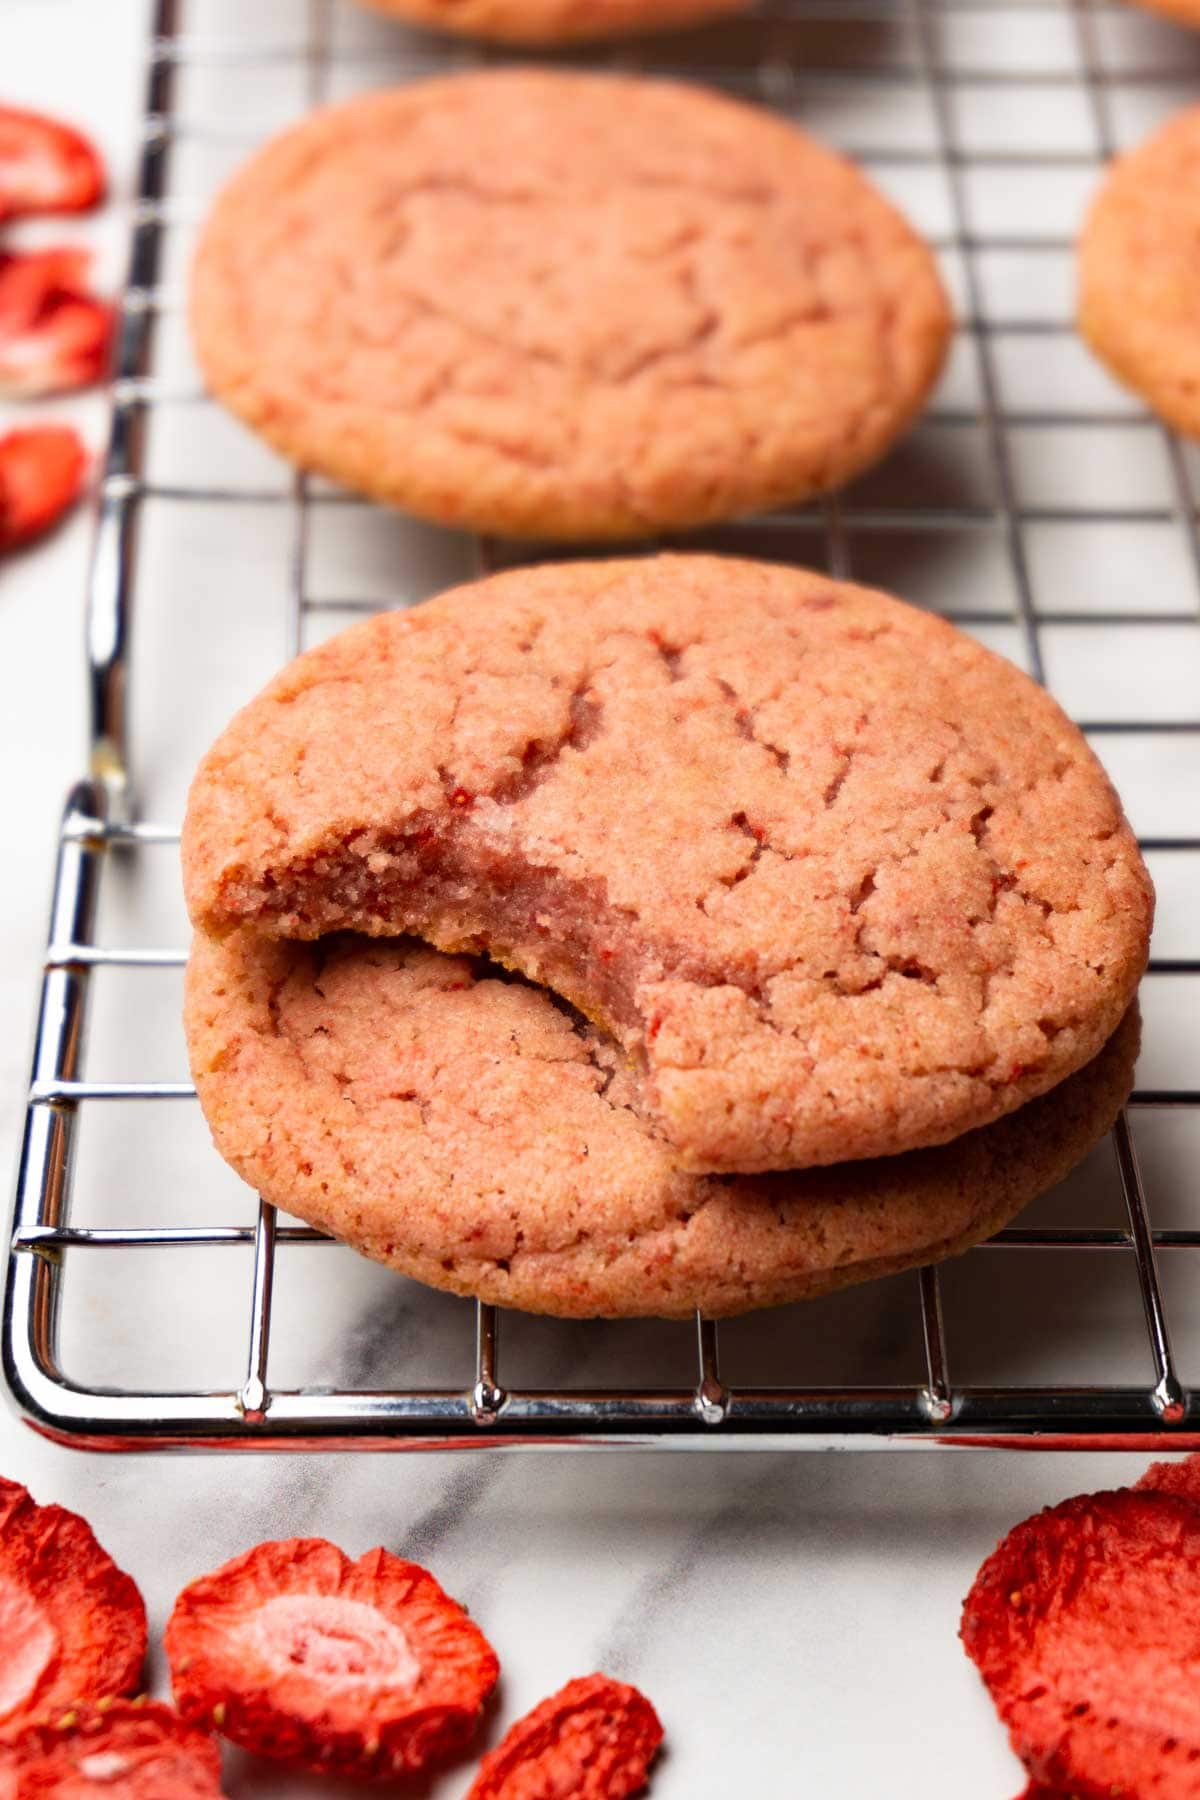 Strawberry cookies are on a cooling rack, one bite is taken from one of the cookies.